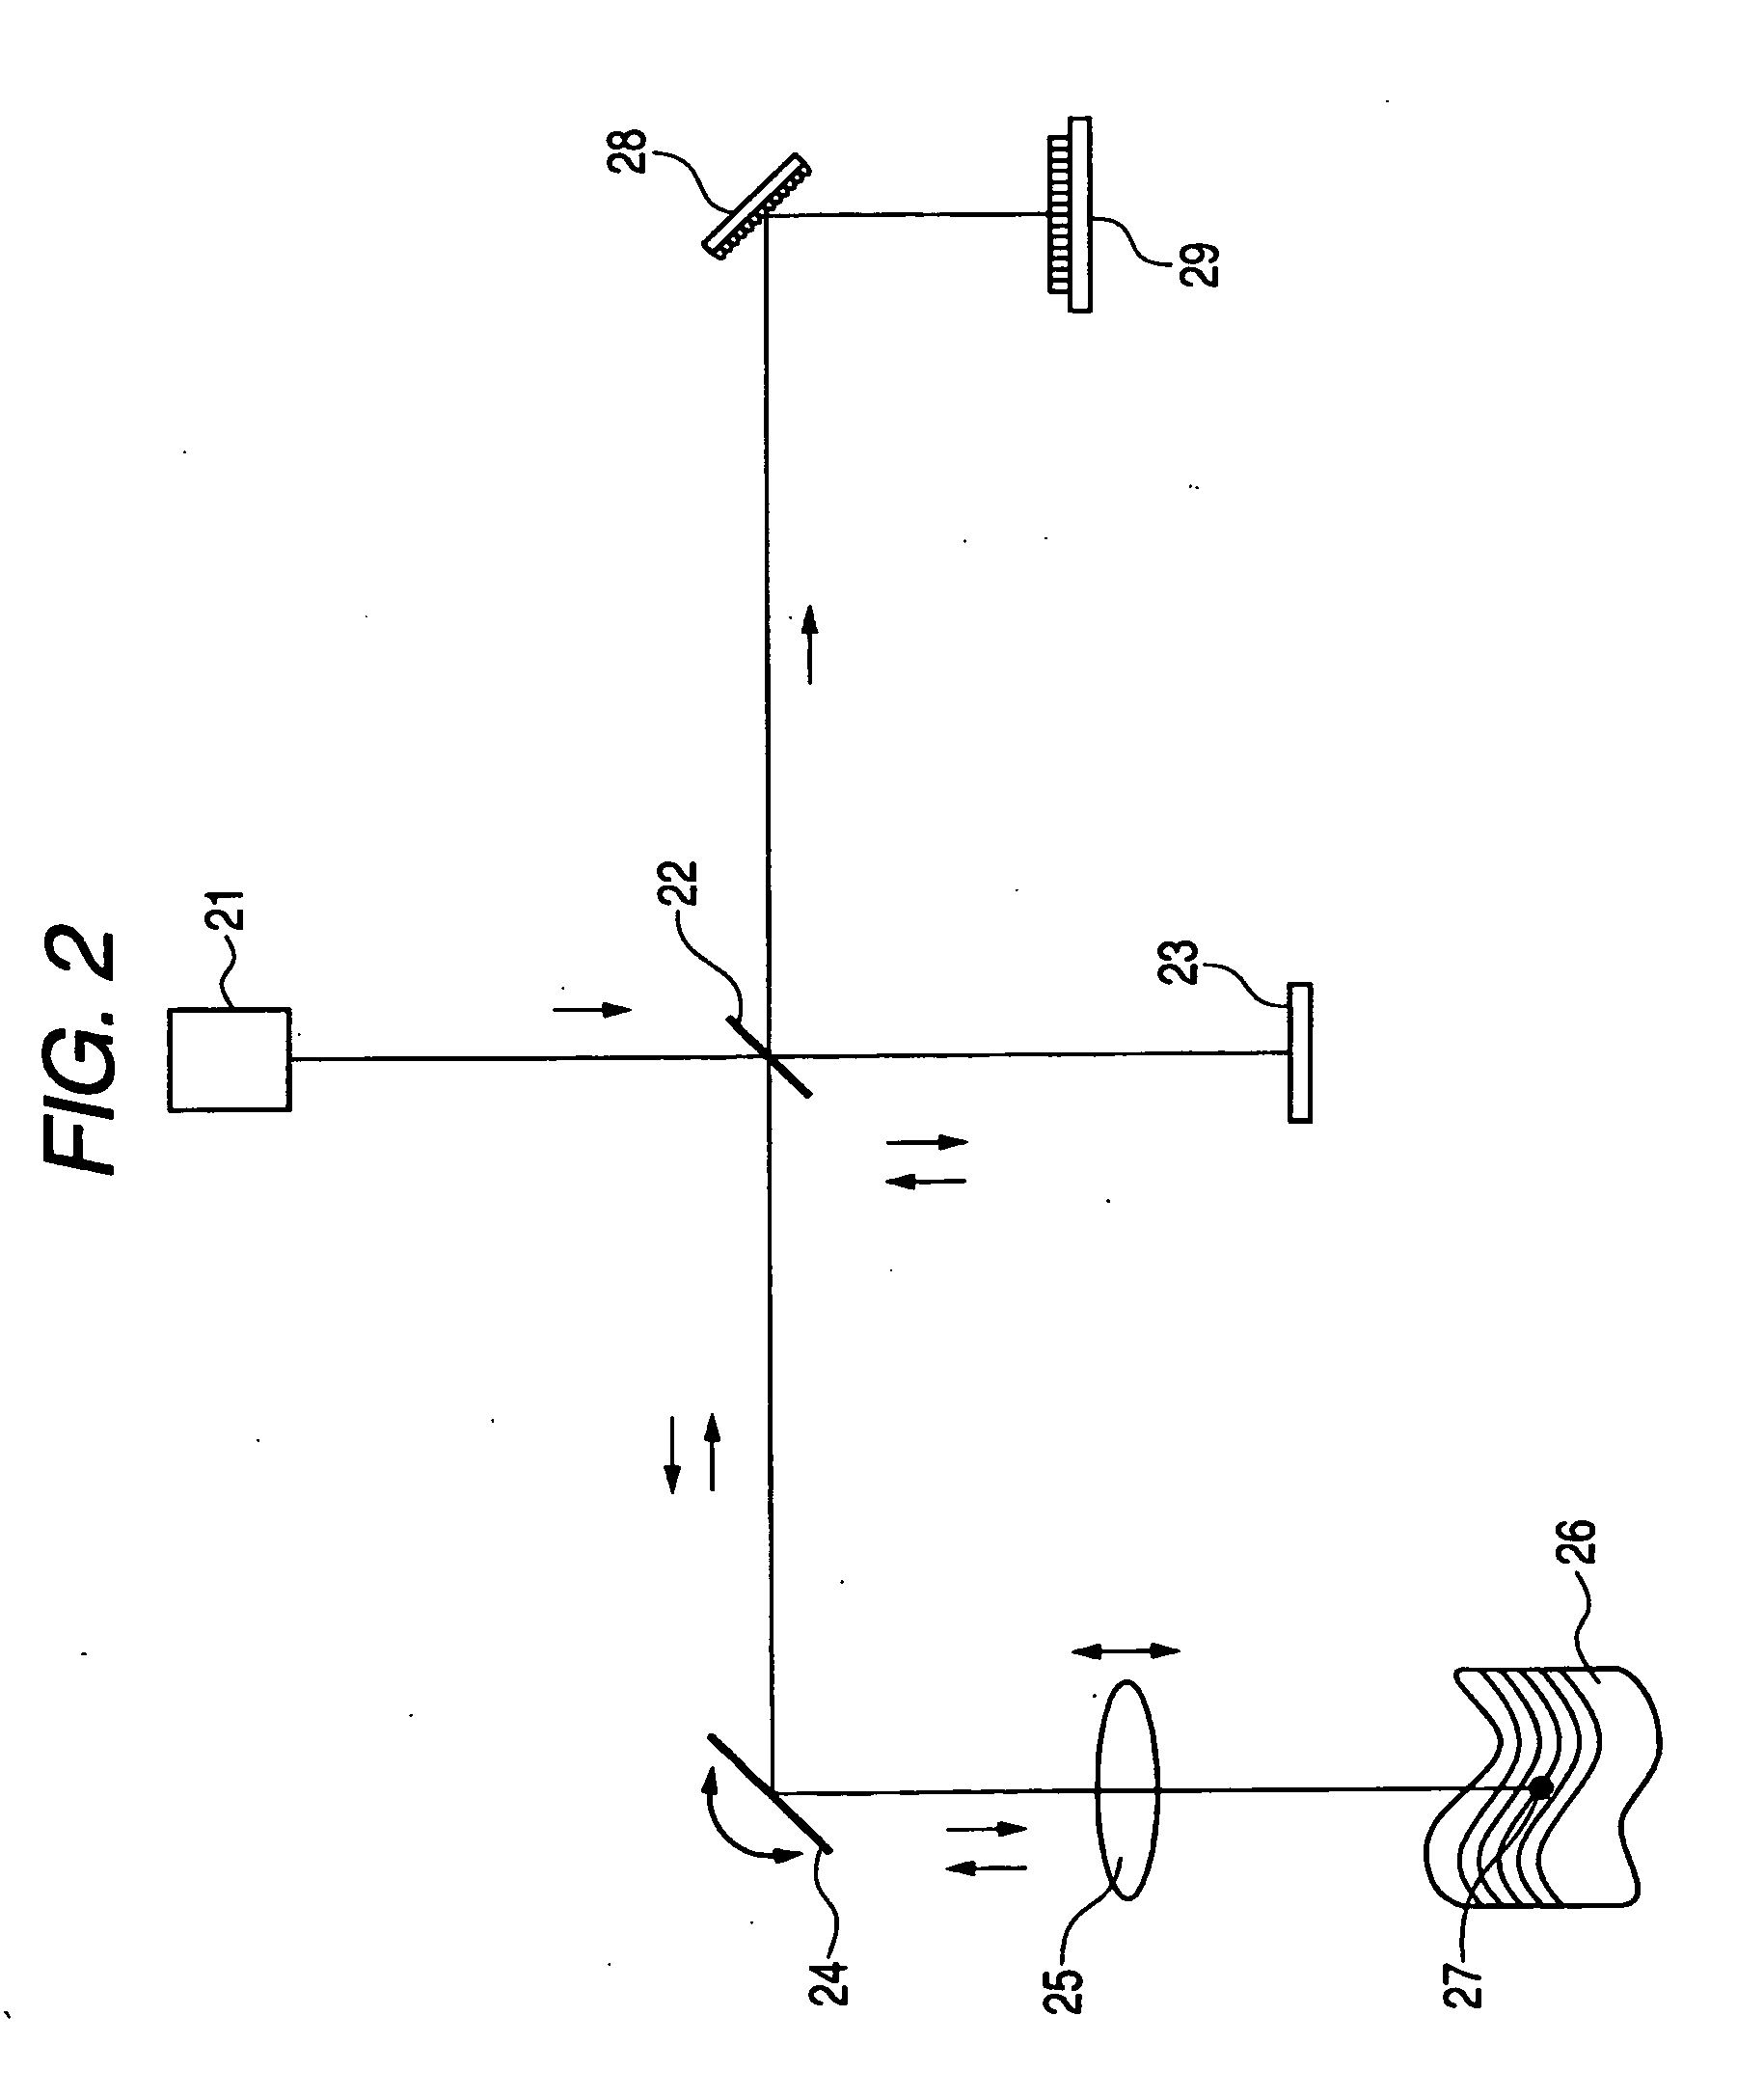 Image forming method and optical coherence tomograph apparatus using optical coherence tomography